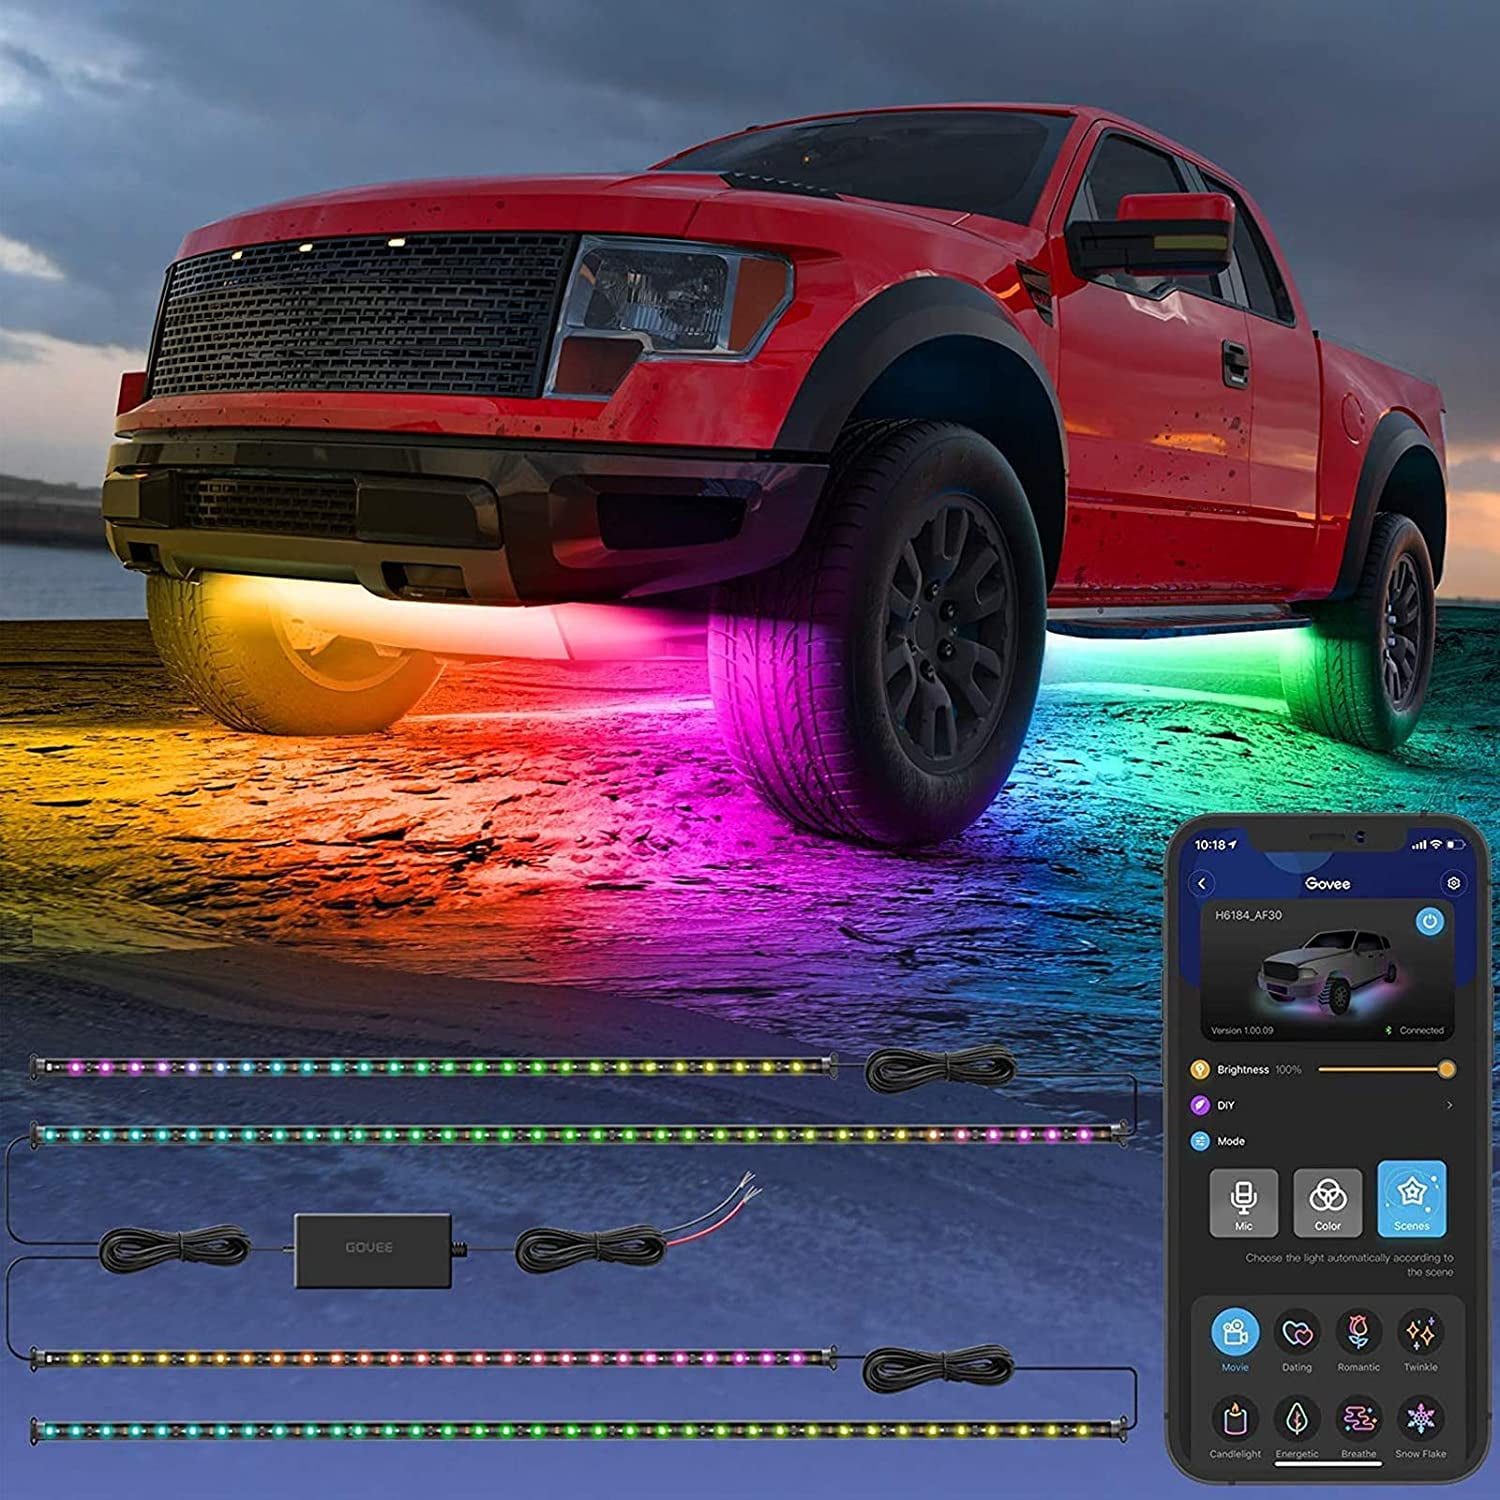 BAOLICY Car Underglow Led Lights 12V with 8 Color Sound Active Function Wireless Remote Control Music Control Waterproof for Car Truck Offroad Jeep Vehicle 